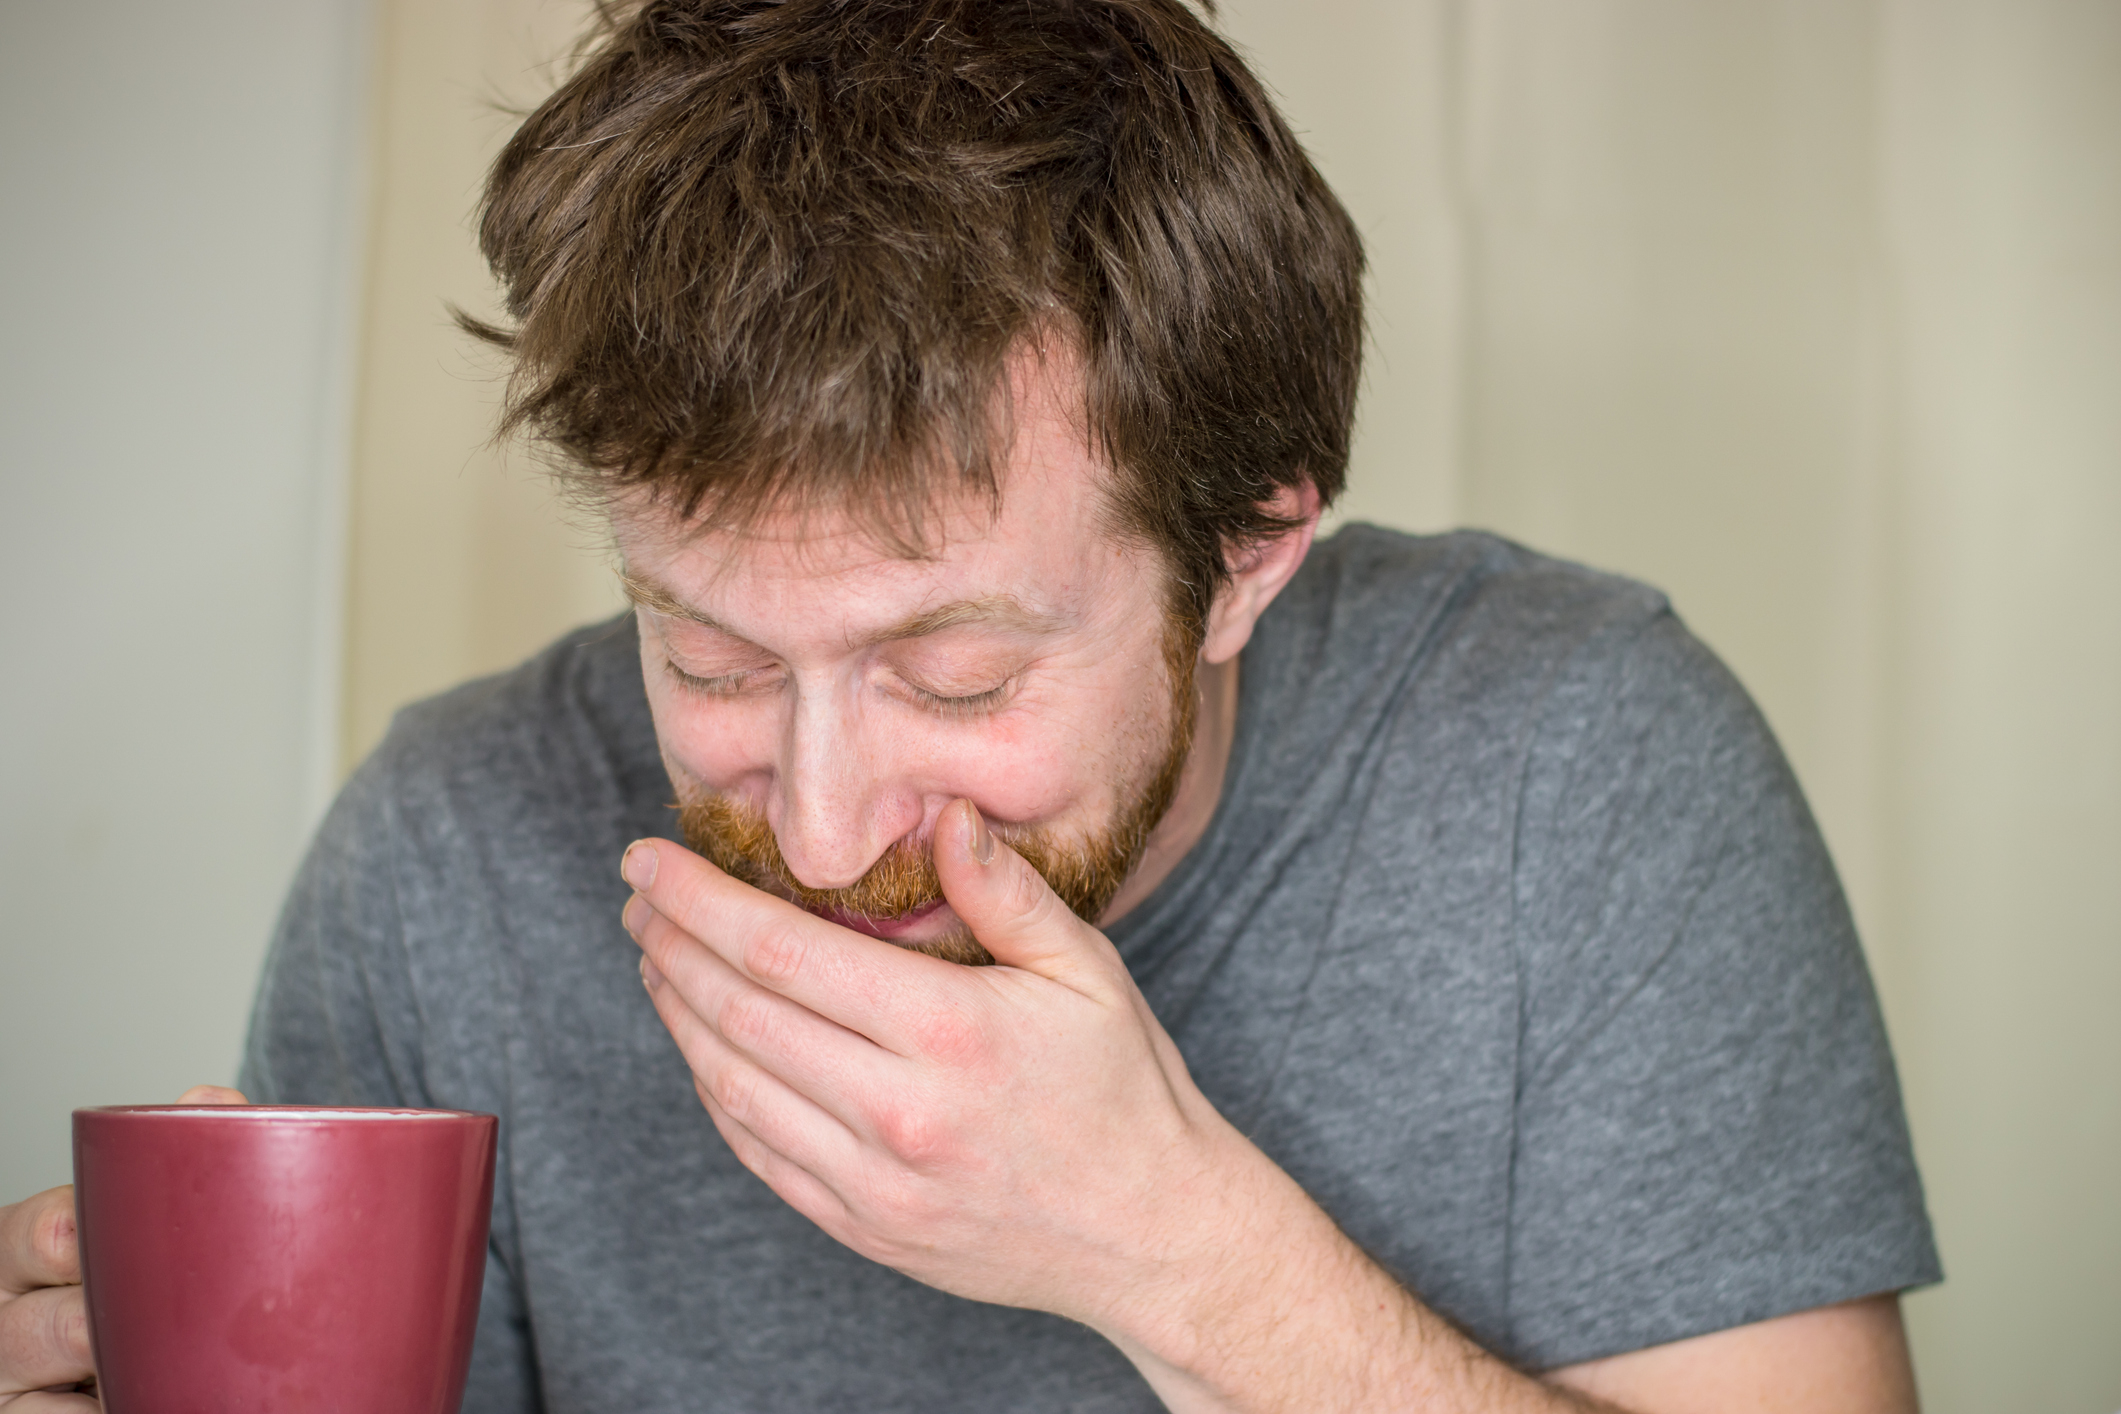 Man laughs while holding a mug, hand covering his mouth